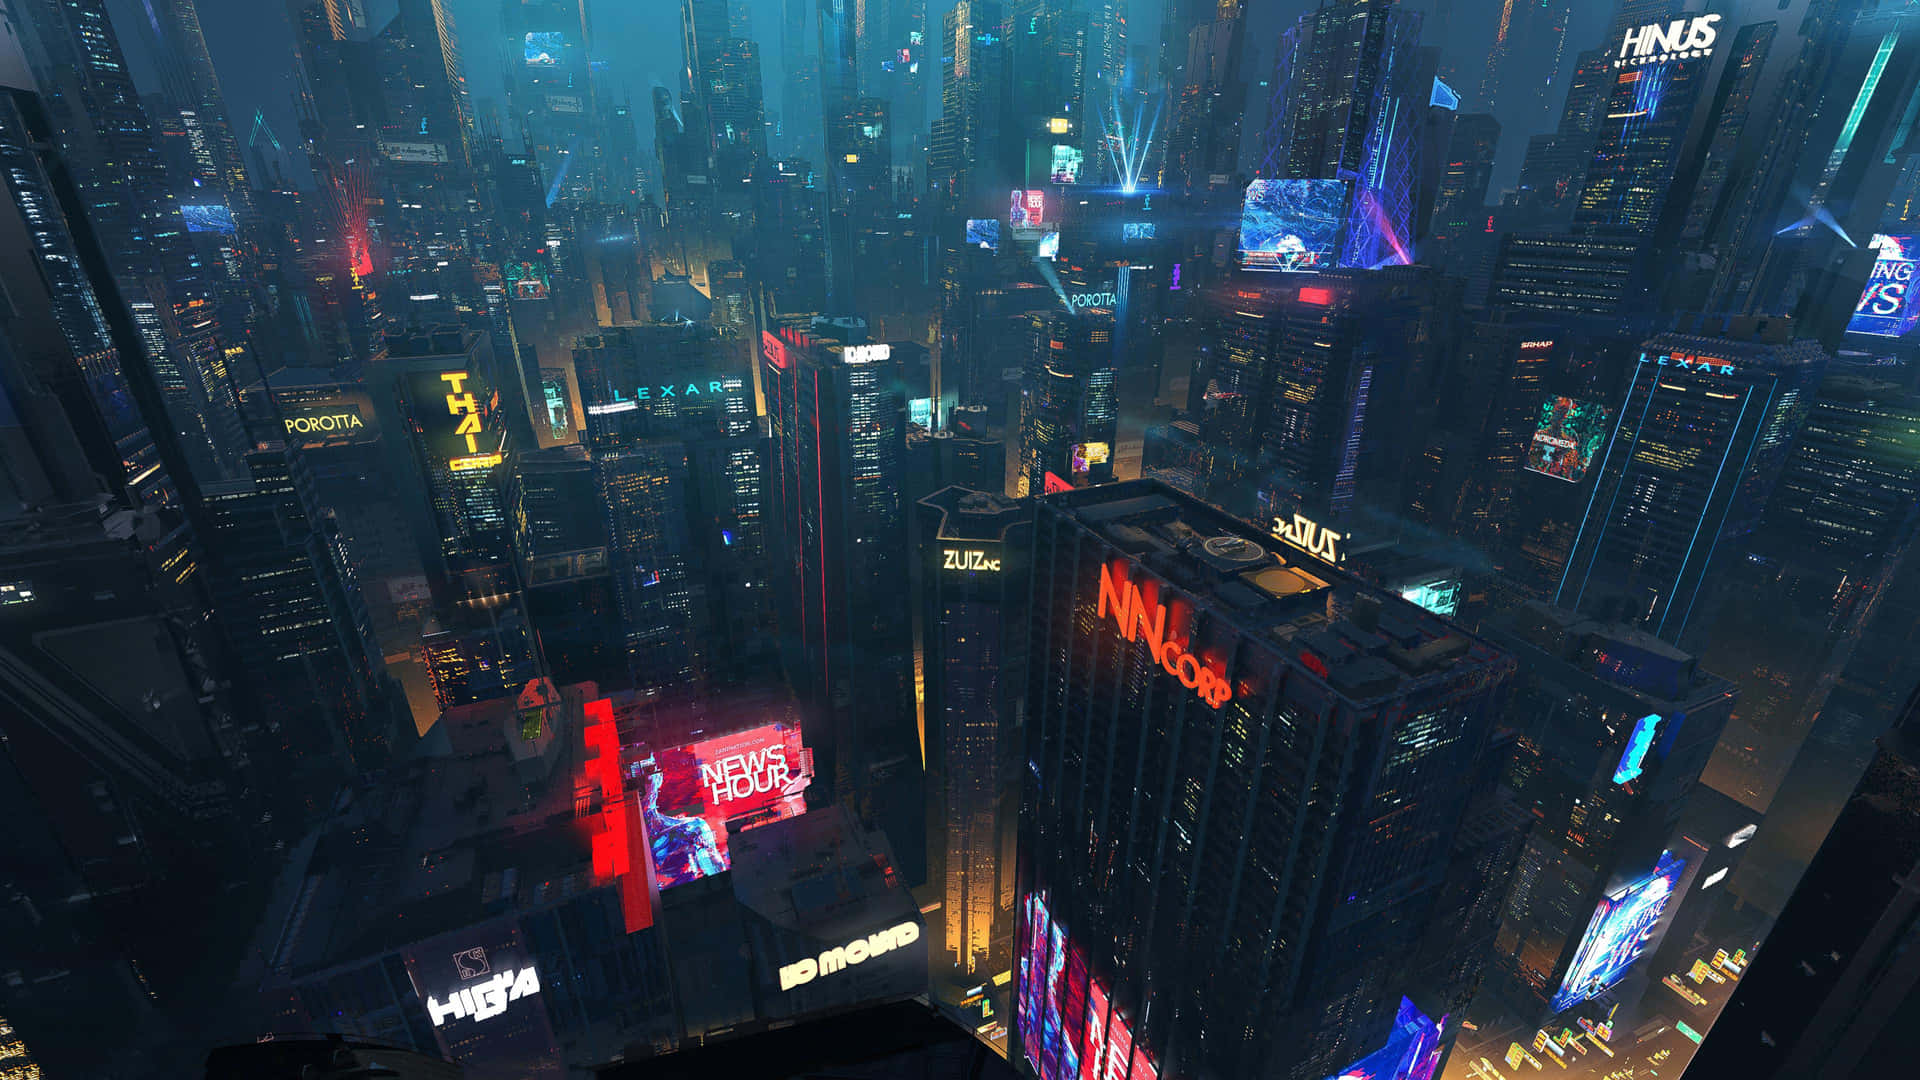 Welcome to the Night City in Cyberpunk